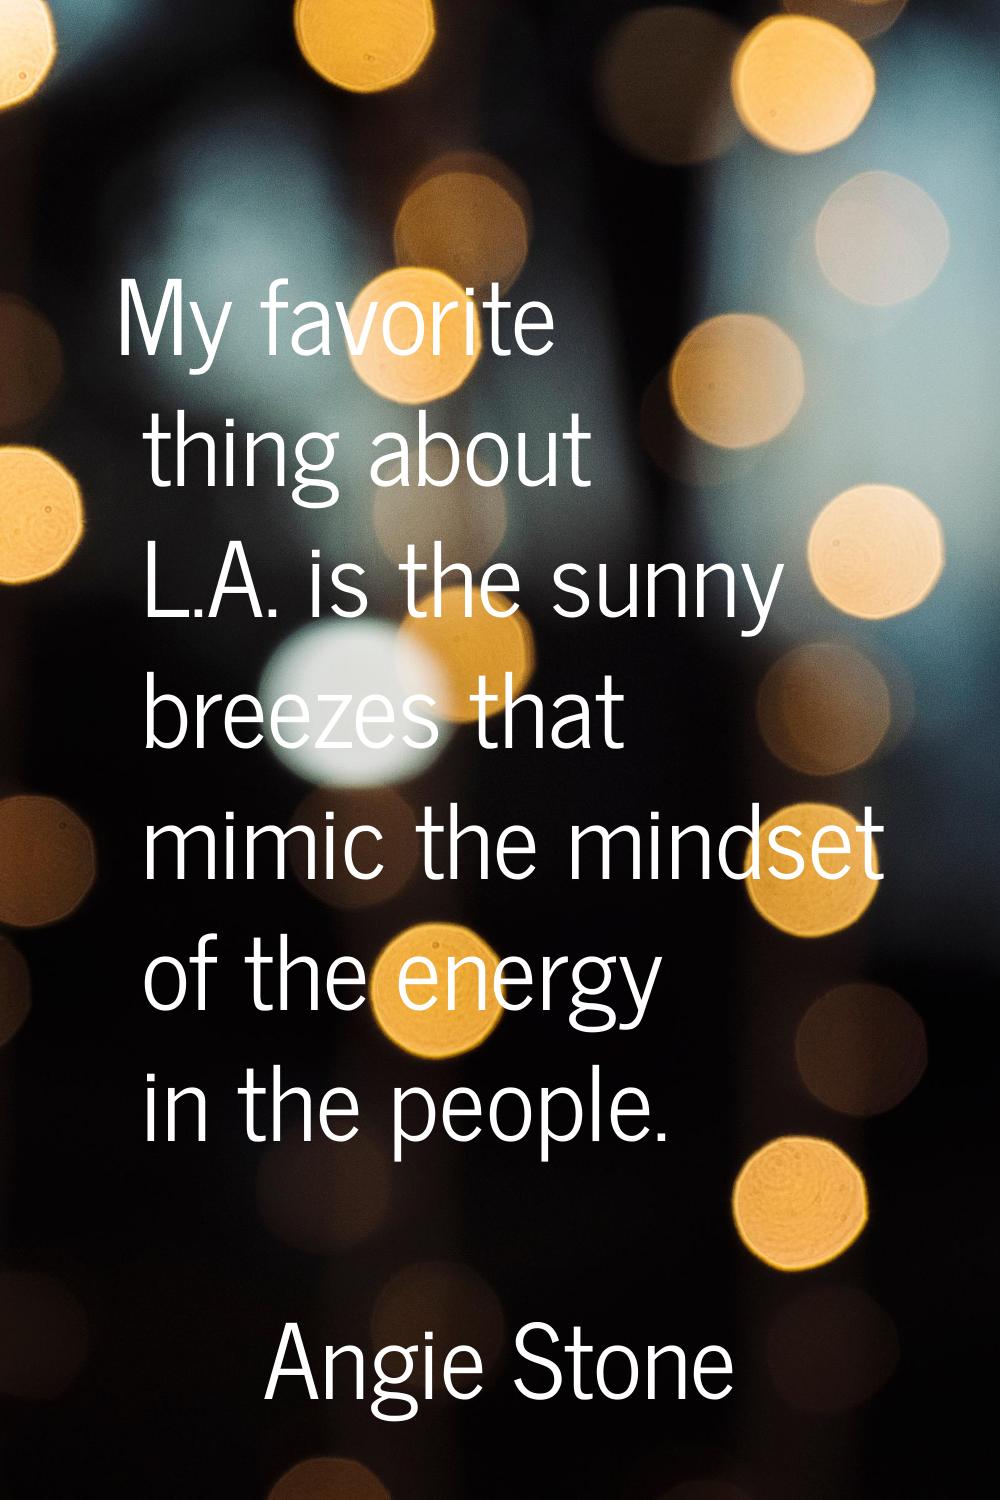 My favorite thing about L.A. is the sunny breezes that mimic the mindset of the energy in the peopl